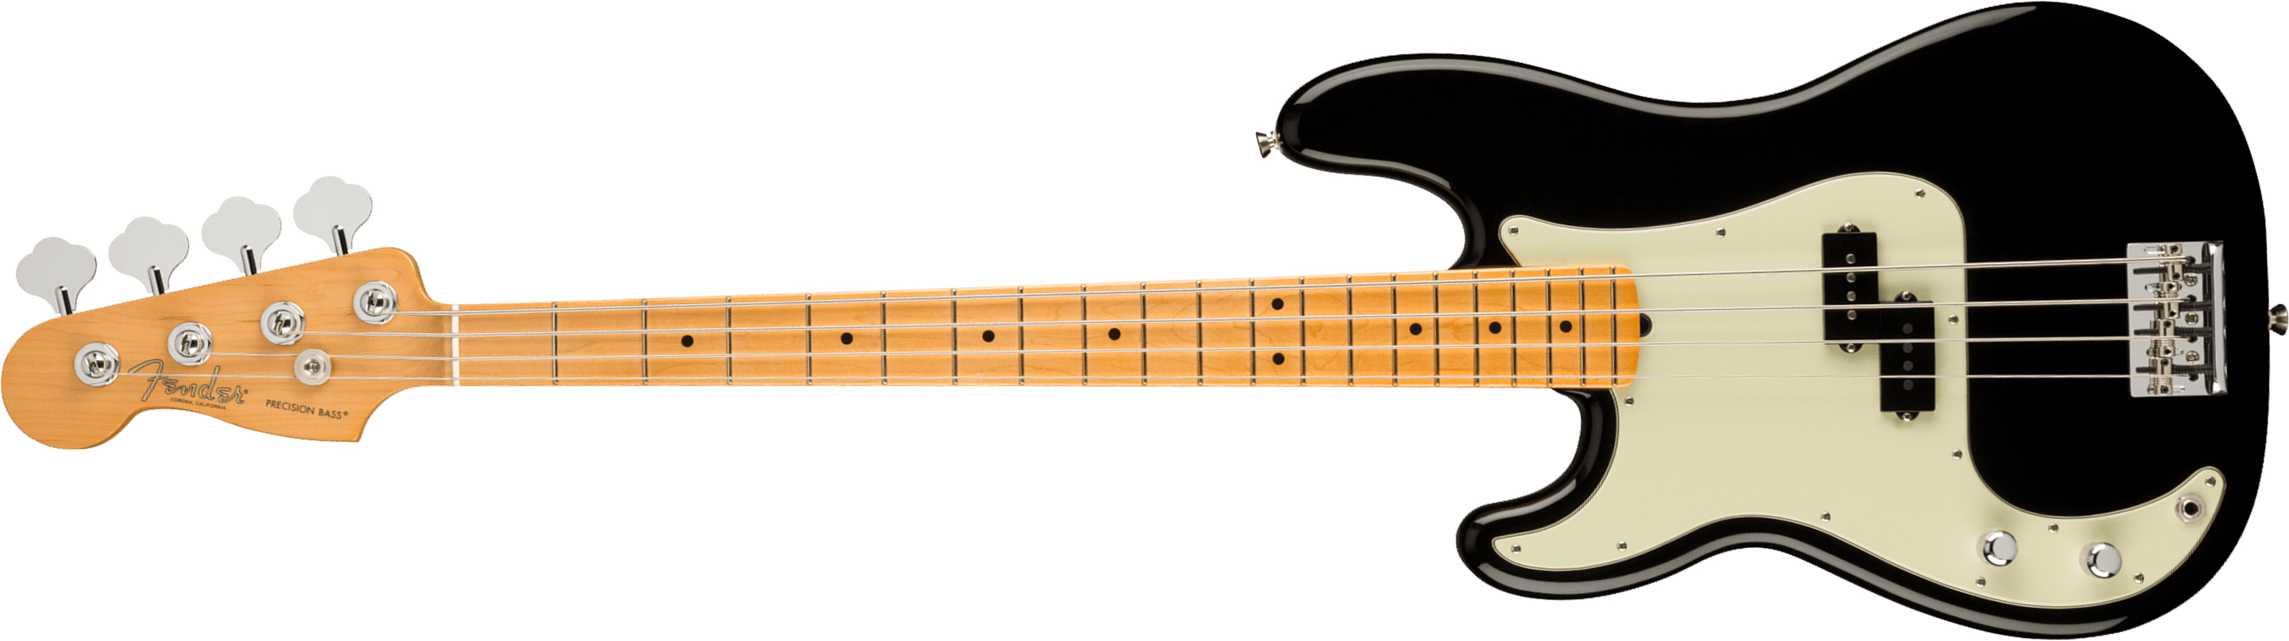 Fender Precision Bass American Professional Ii Lh Gaucher Usa Mn - Black - Solid body electric bass - Main picture